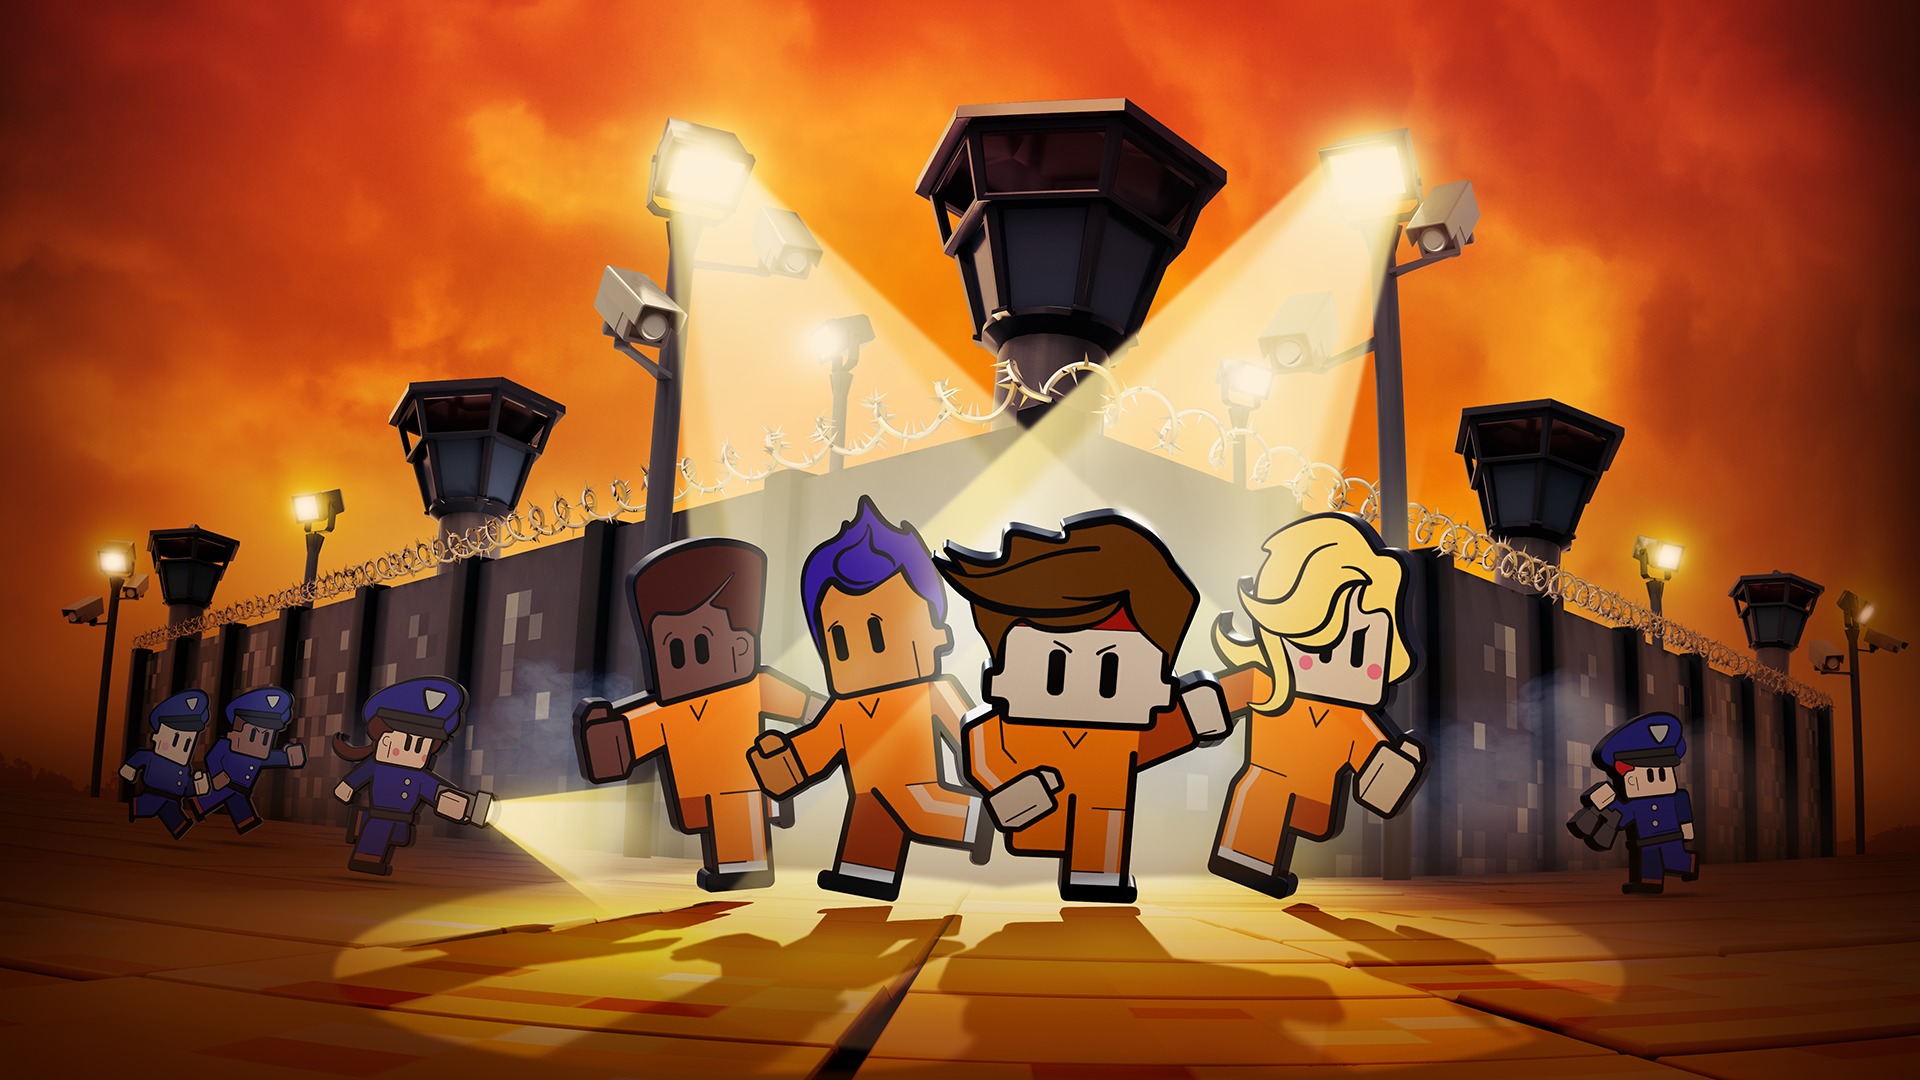 download the escapists 2 xbox for free